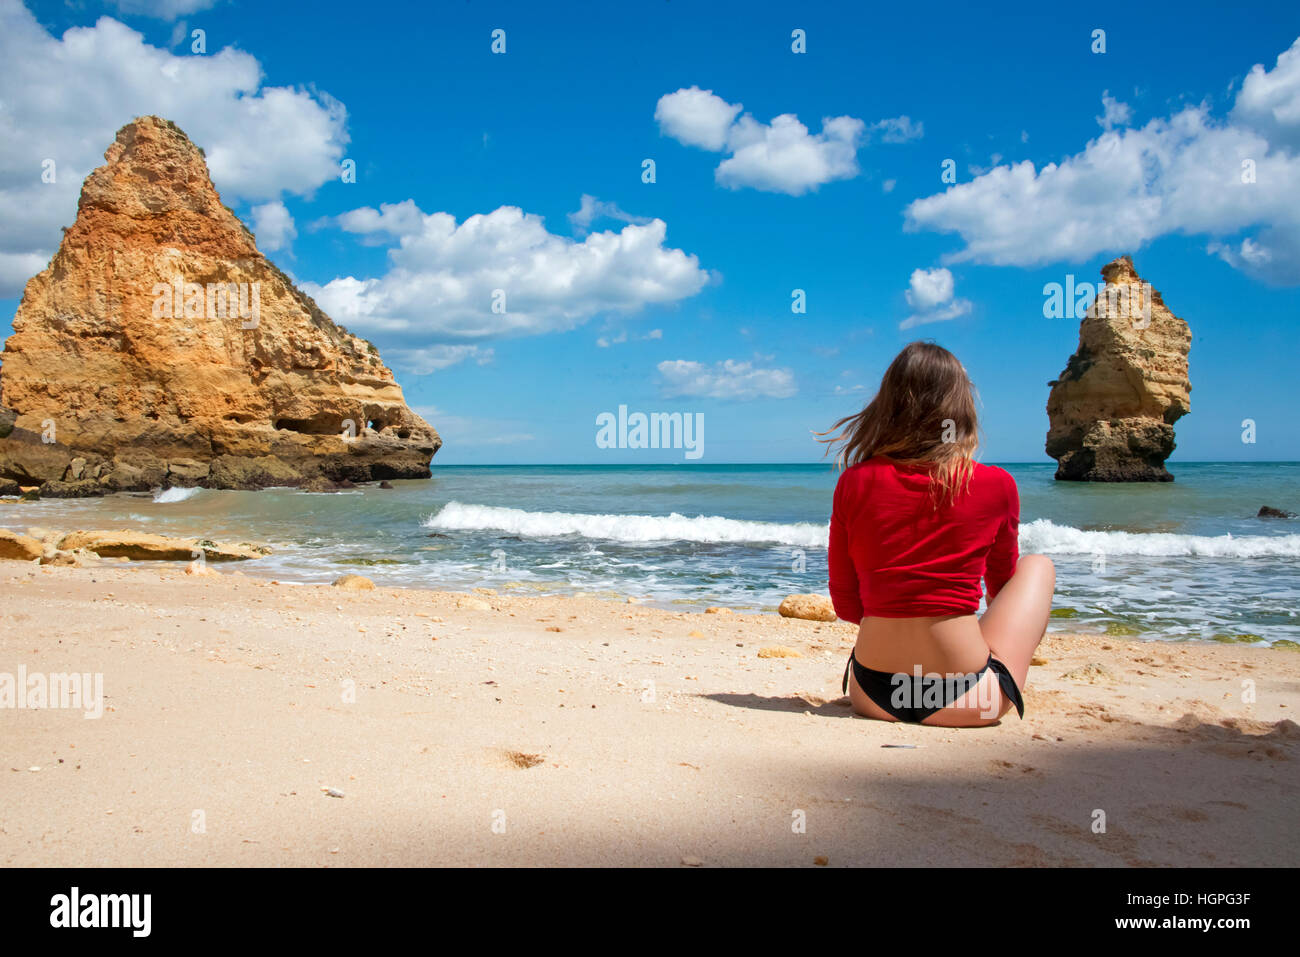 Young girl sitting in the white sand on the beach wearing black Brazilian bikini and red top Stock Photo